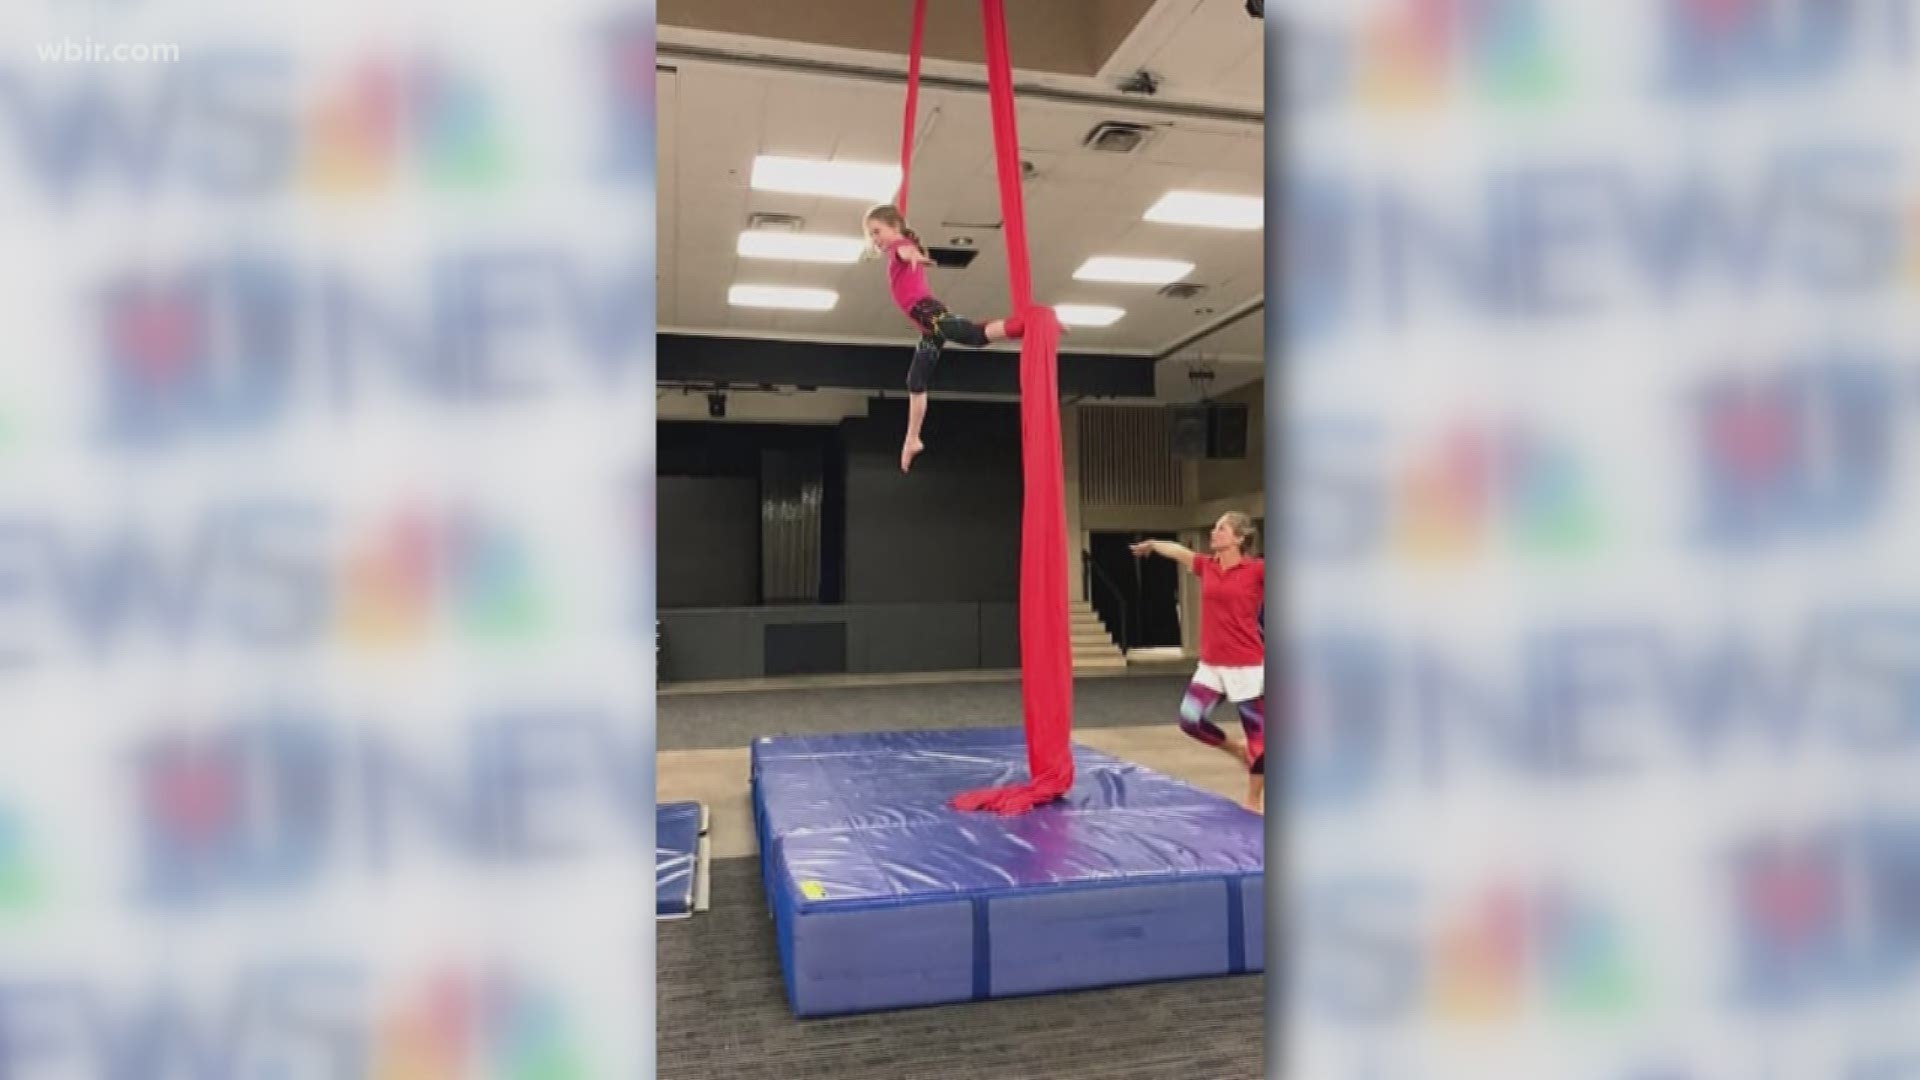 Lily Segars is 10 years old and performs with the Knoxville's Children Theatre. She is super talented and can do some amazing tricks. Dec. 18, 2018-4pm